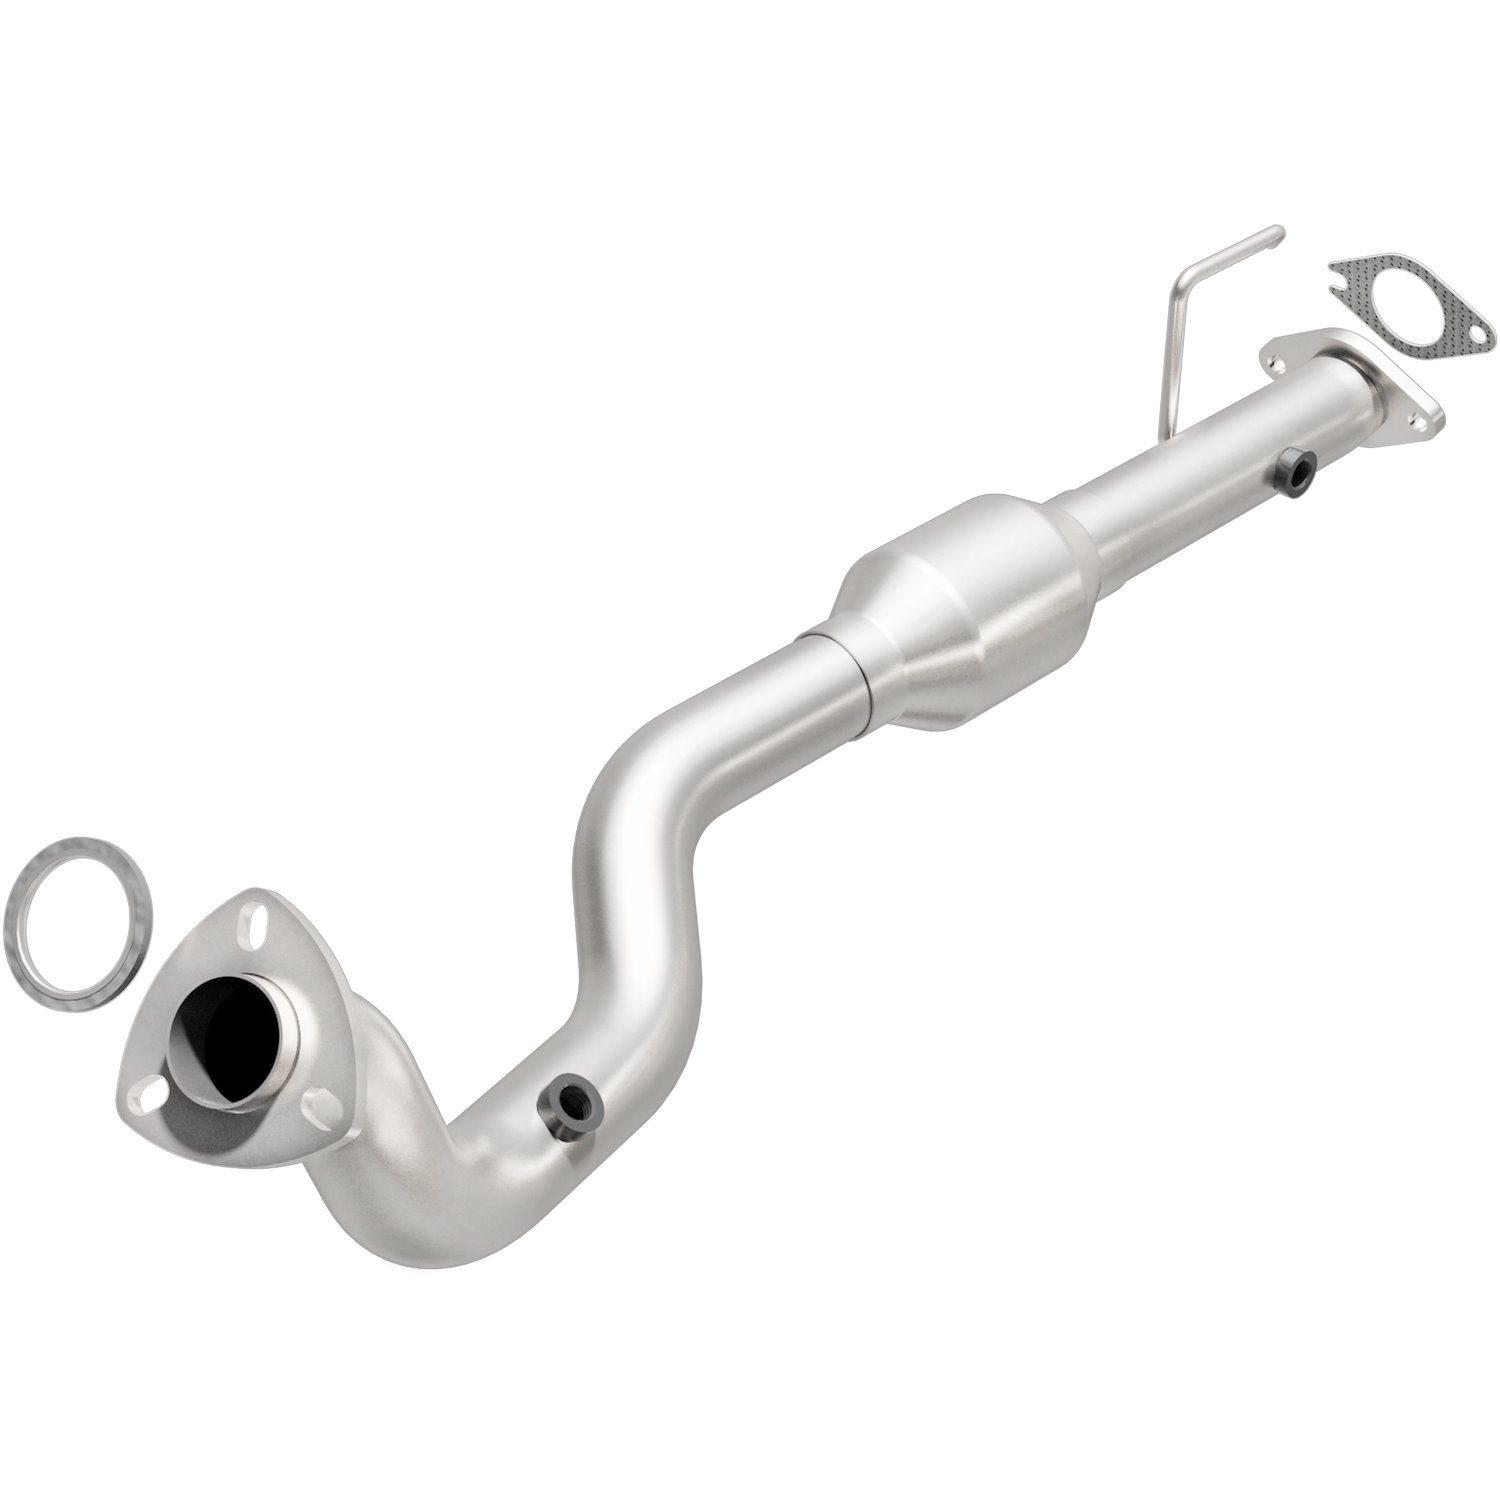 HM Grade Federal / EPA Compliant Direct-Fit Catalytic Converter 93161